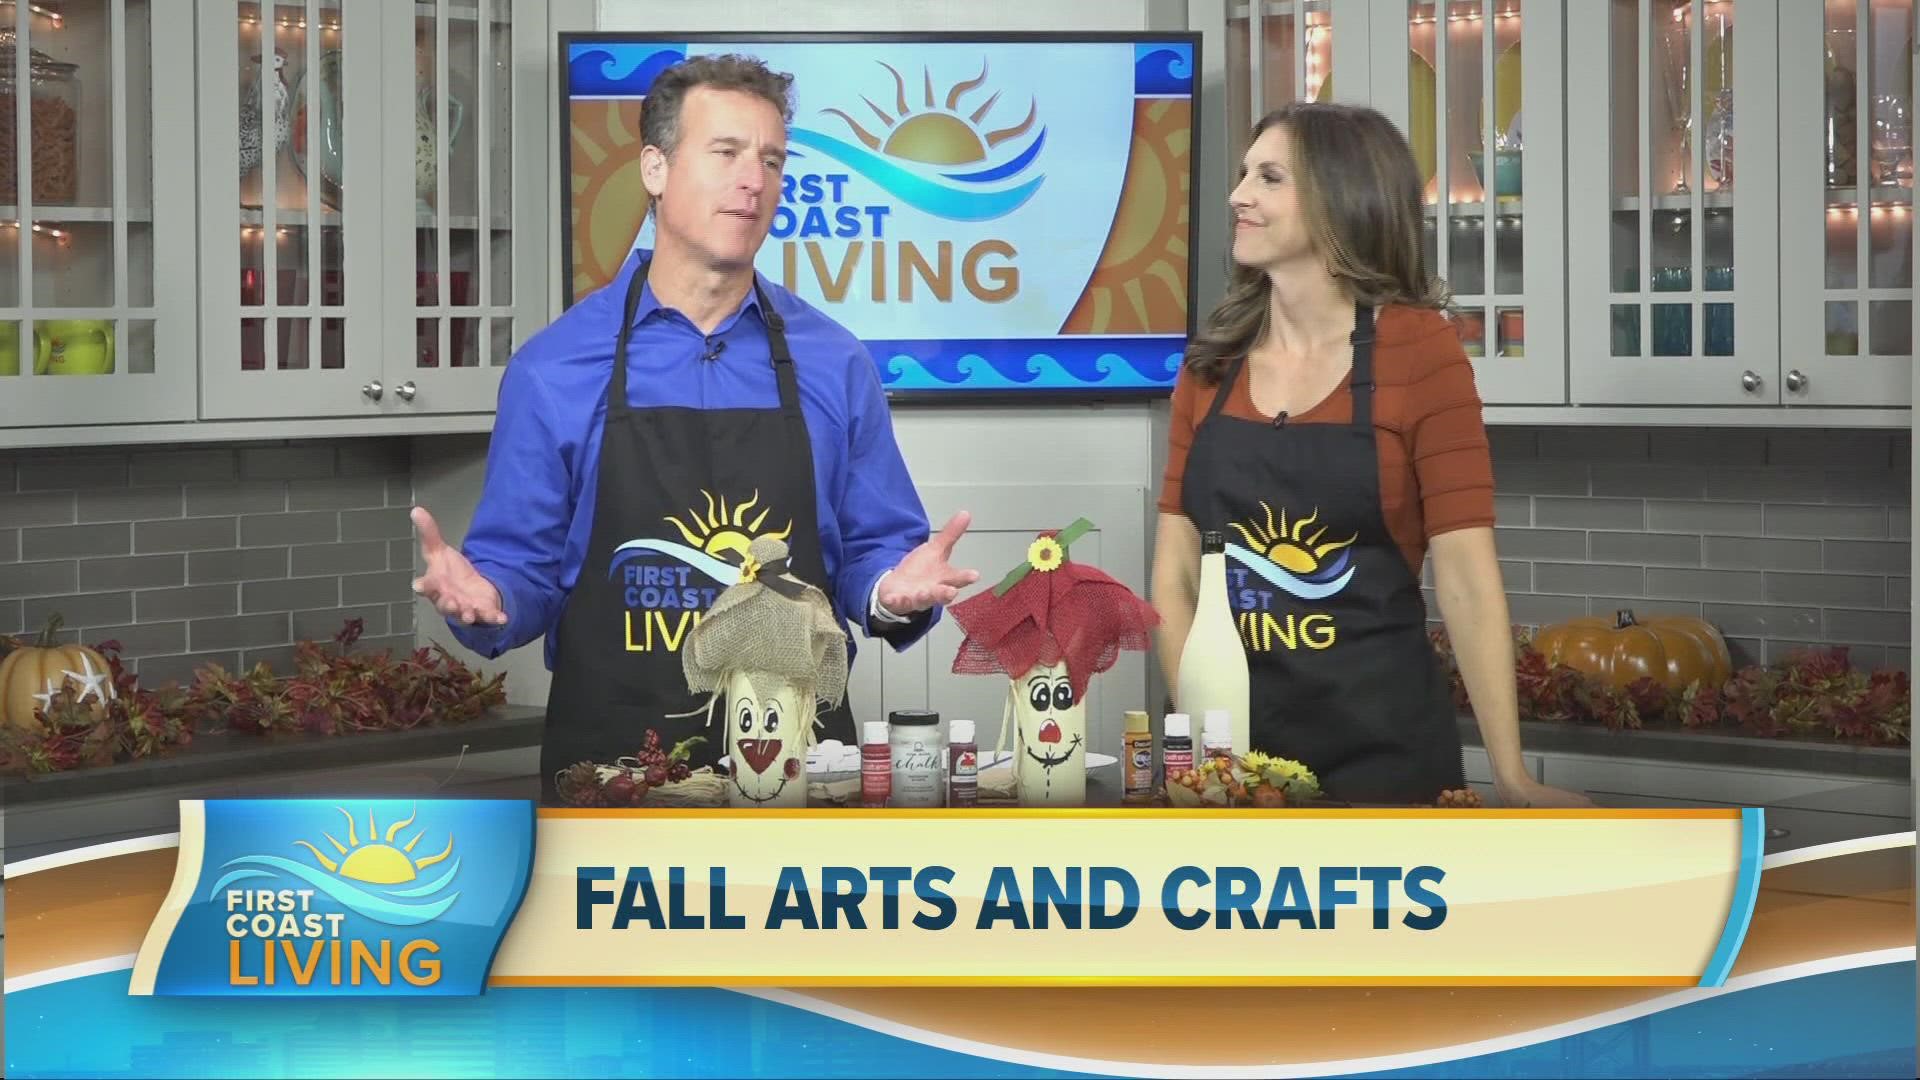 Mike Prangley and Jordan Wilkerson bring scare crows to life with arts and crafts that get us all excited for the holiday season!